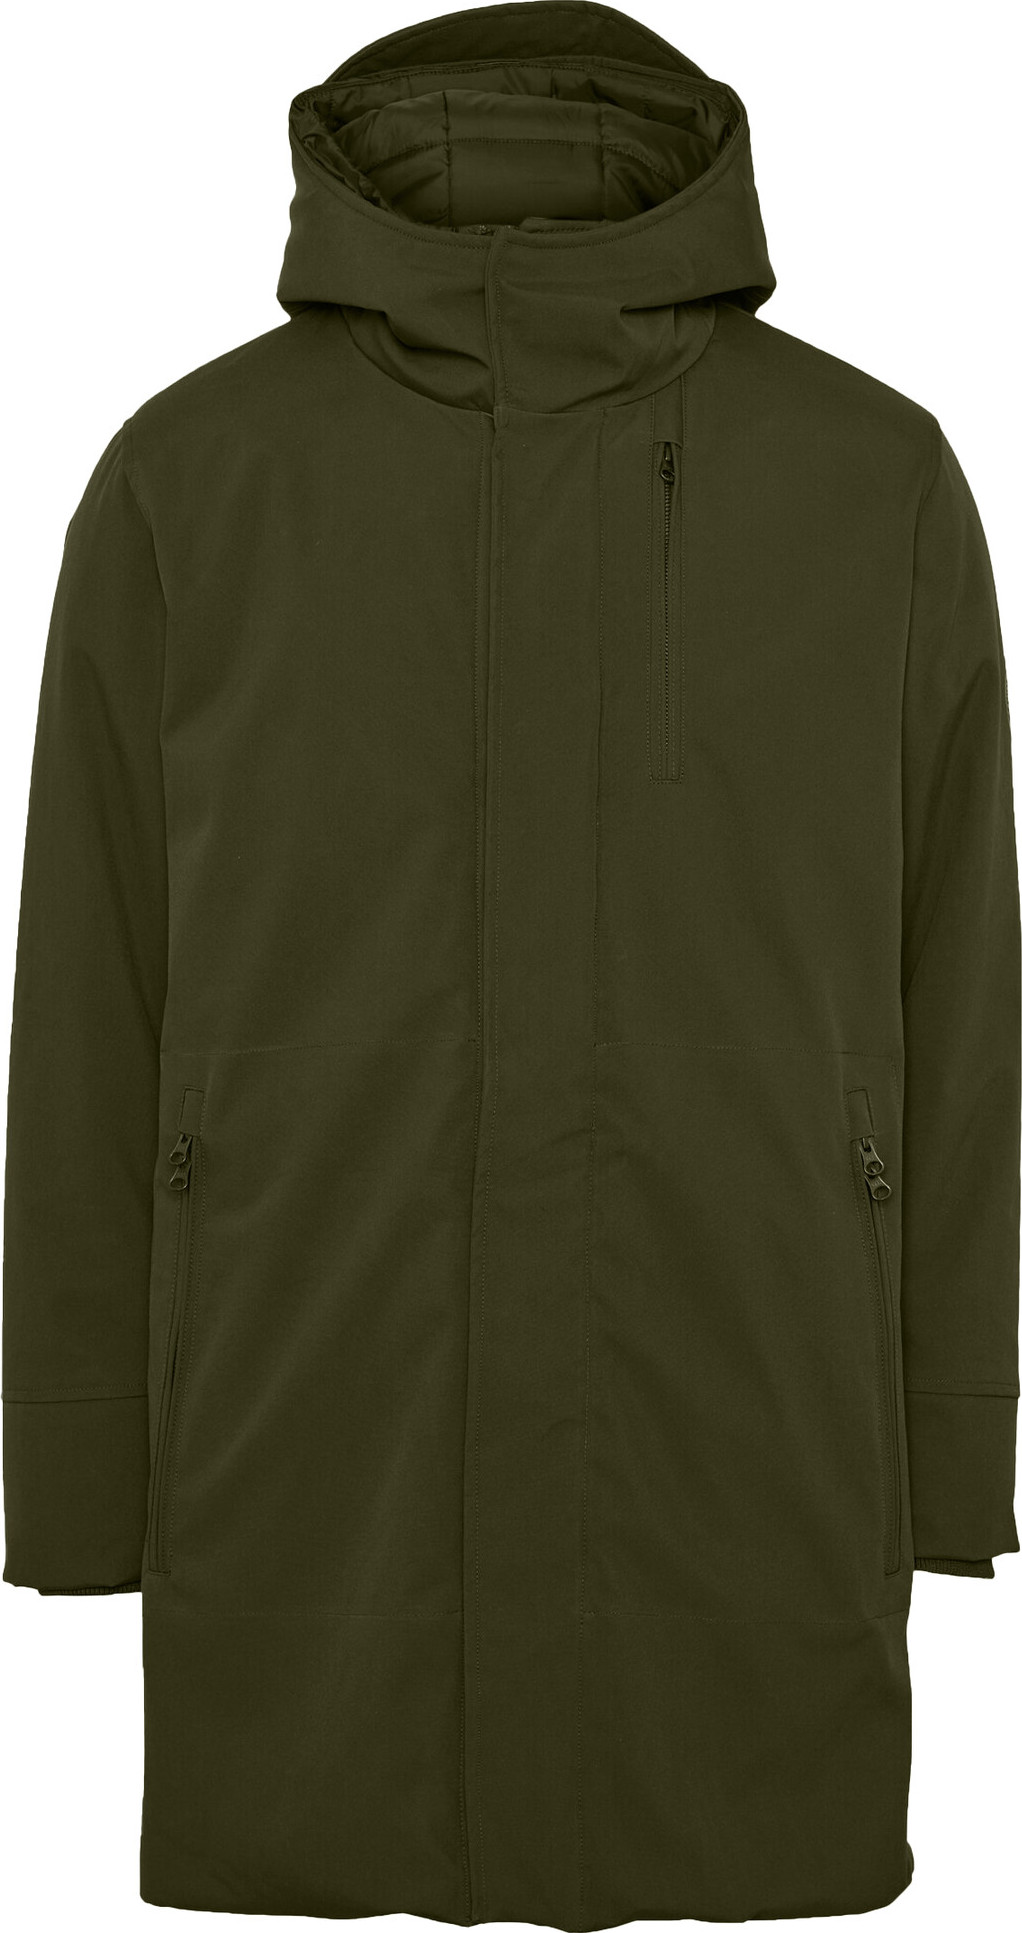 Men’s Long Soft Shell Jacket Climate Shell™ Forrest Night